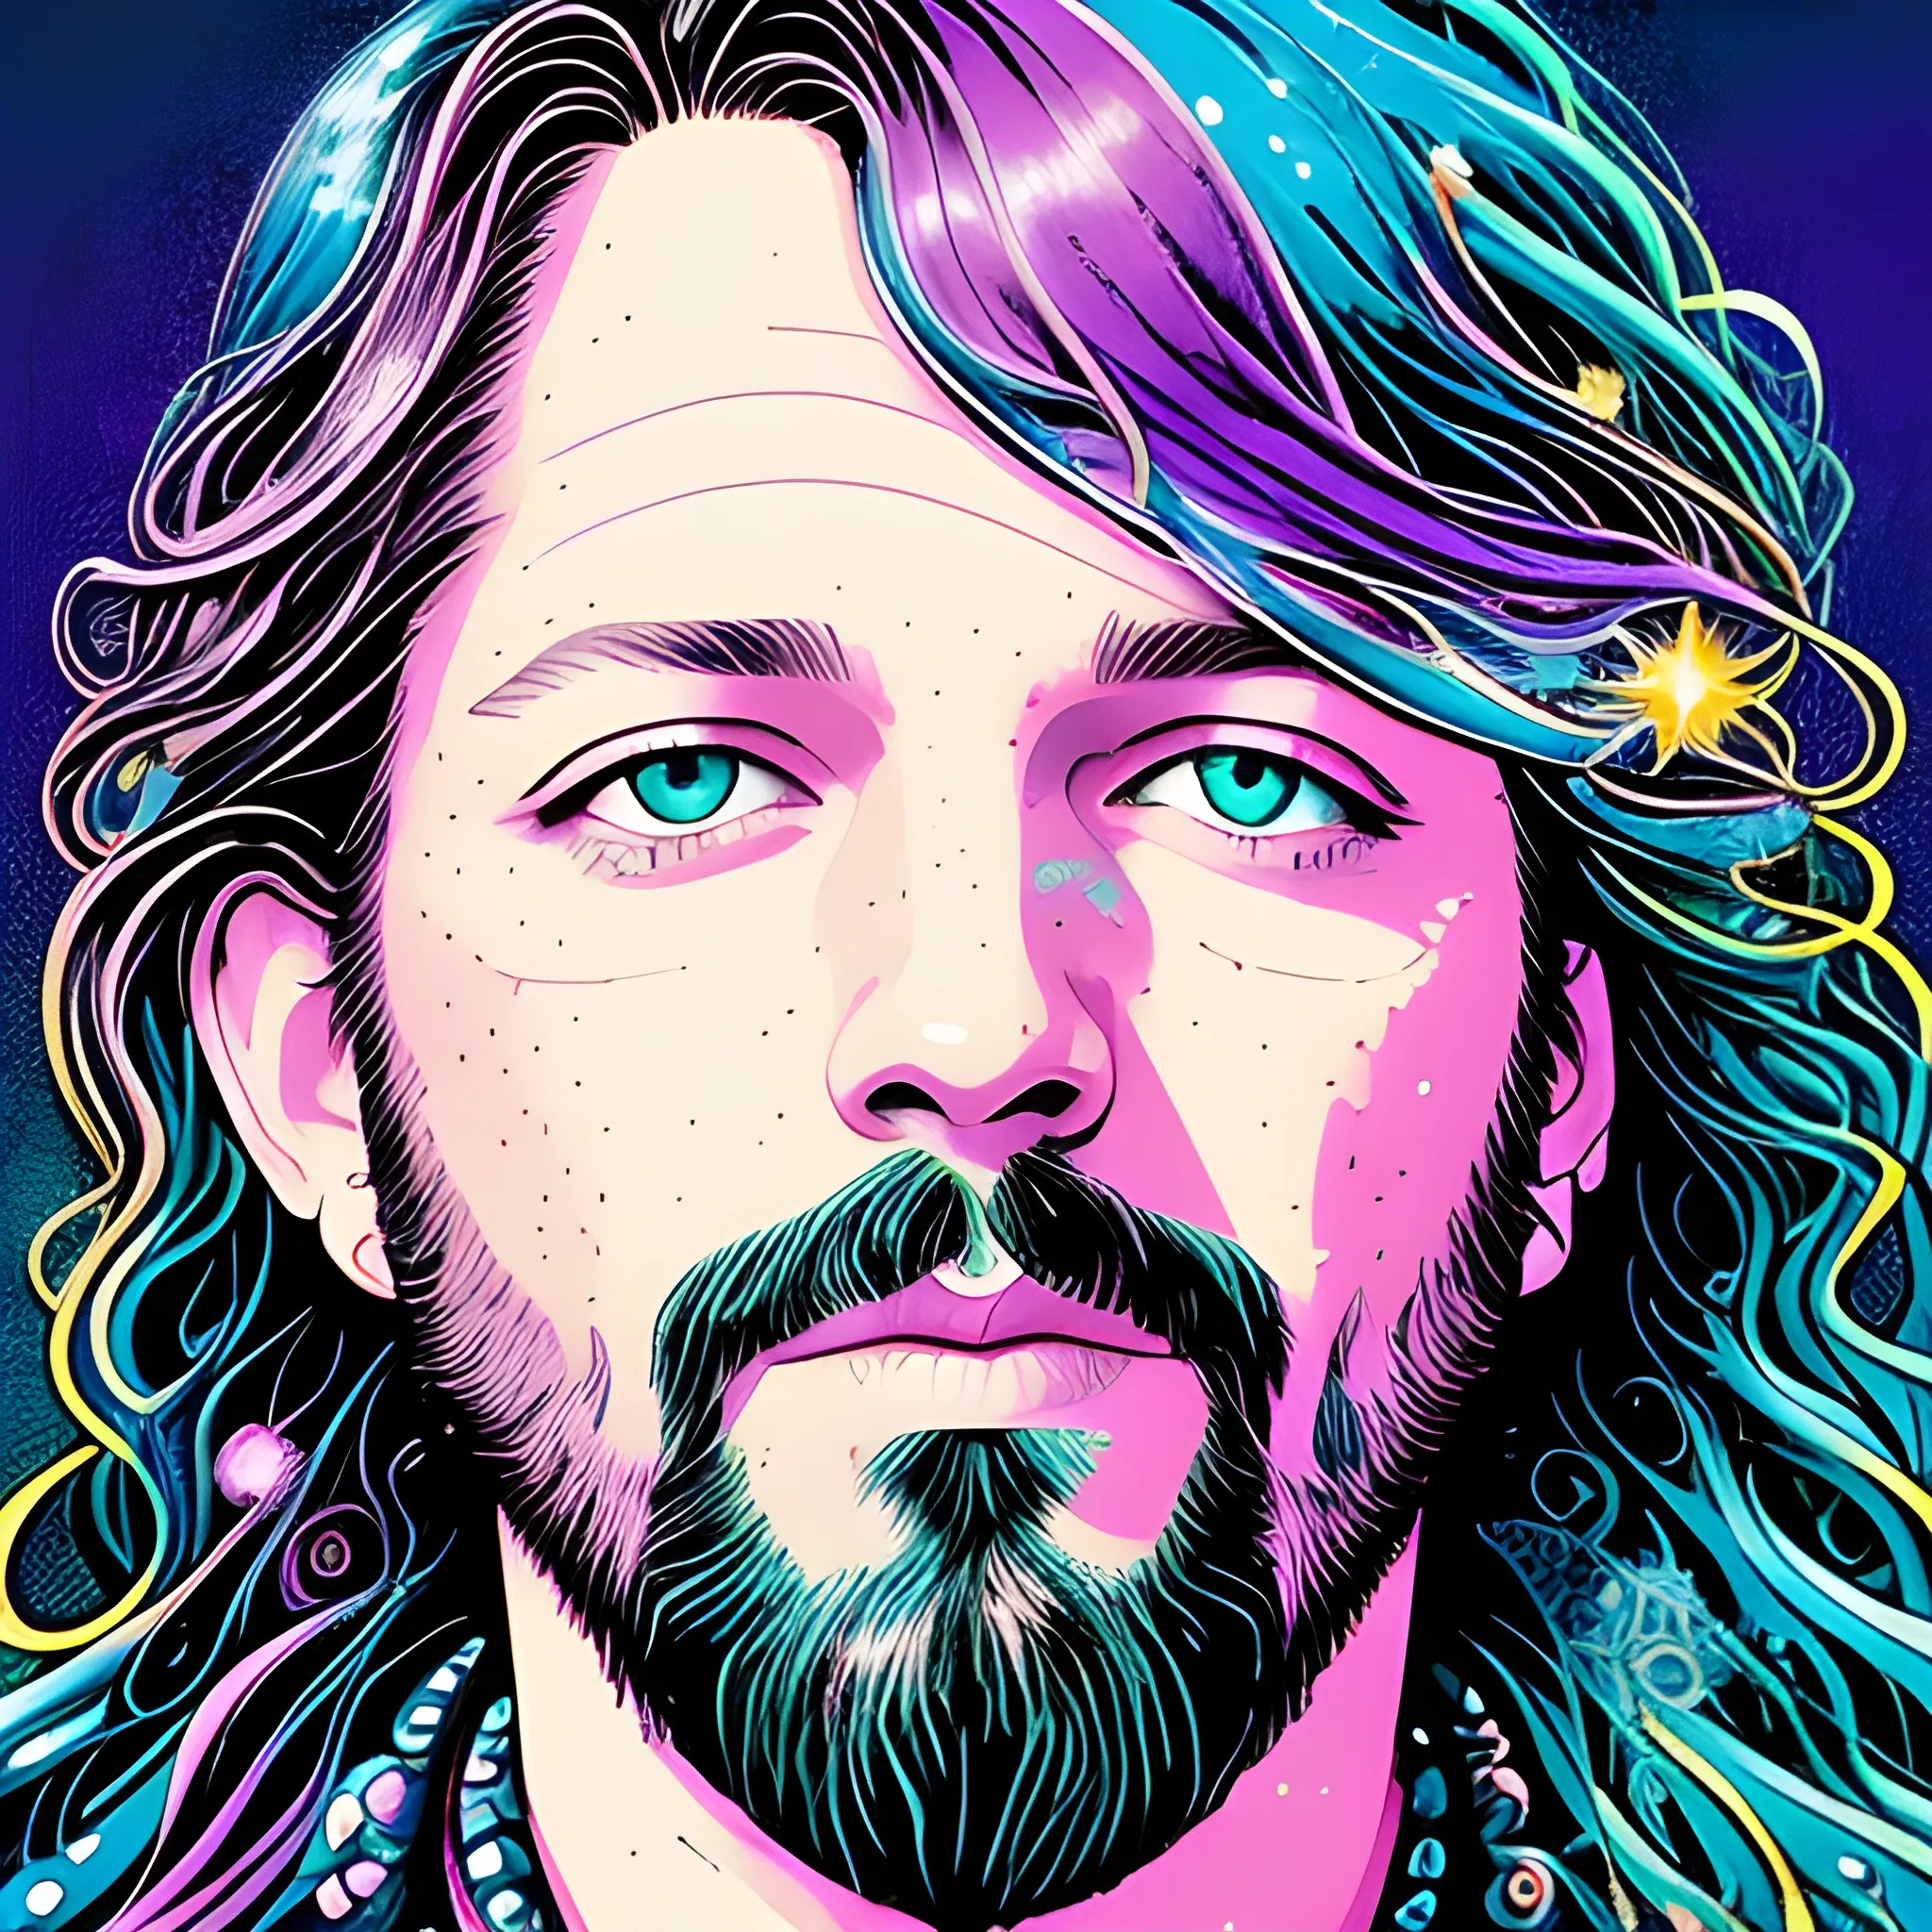 mixed media ink illustration Rich Robinson of The Black Crowes, meticulously detailed face, Rich Robinson, long hair, blue eyes, luminous colorful sparkles, by James R. Eads, Gawki, rajewel, DestinyBlue, Tania Rivilis, Dan Mumford, glitter, airbrush, pink, purple, teal, green, multi-hued